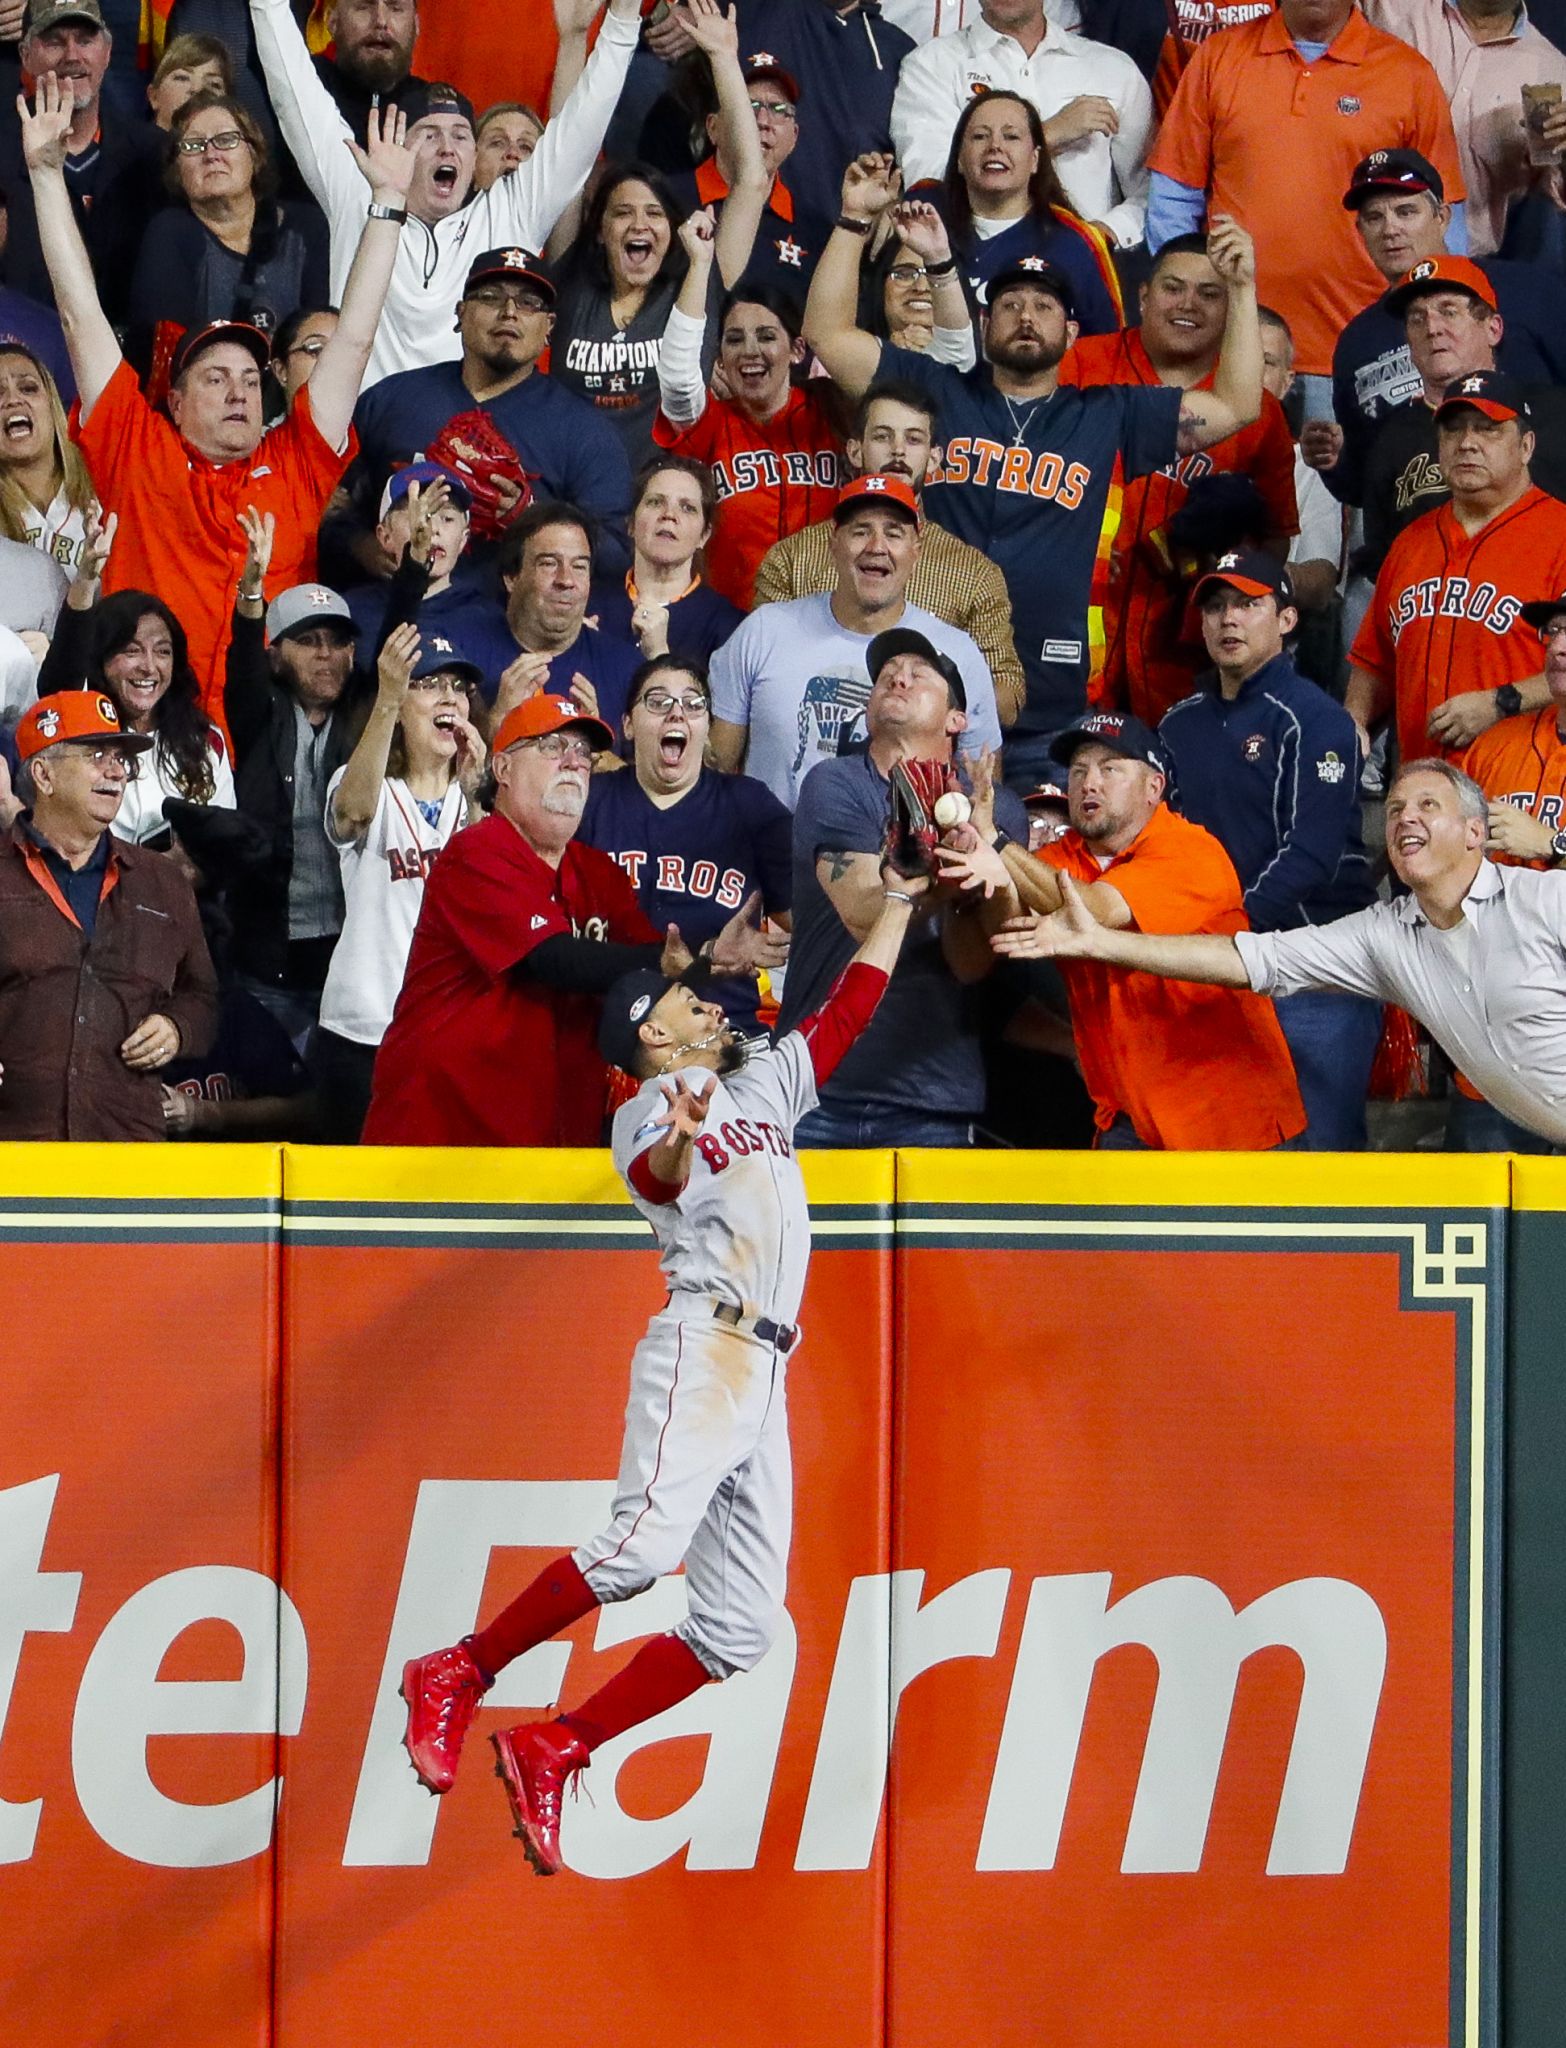 Fans lash out at Cubs fan for interfering with Jose Altuve's potential home  run - Ban him for life